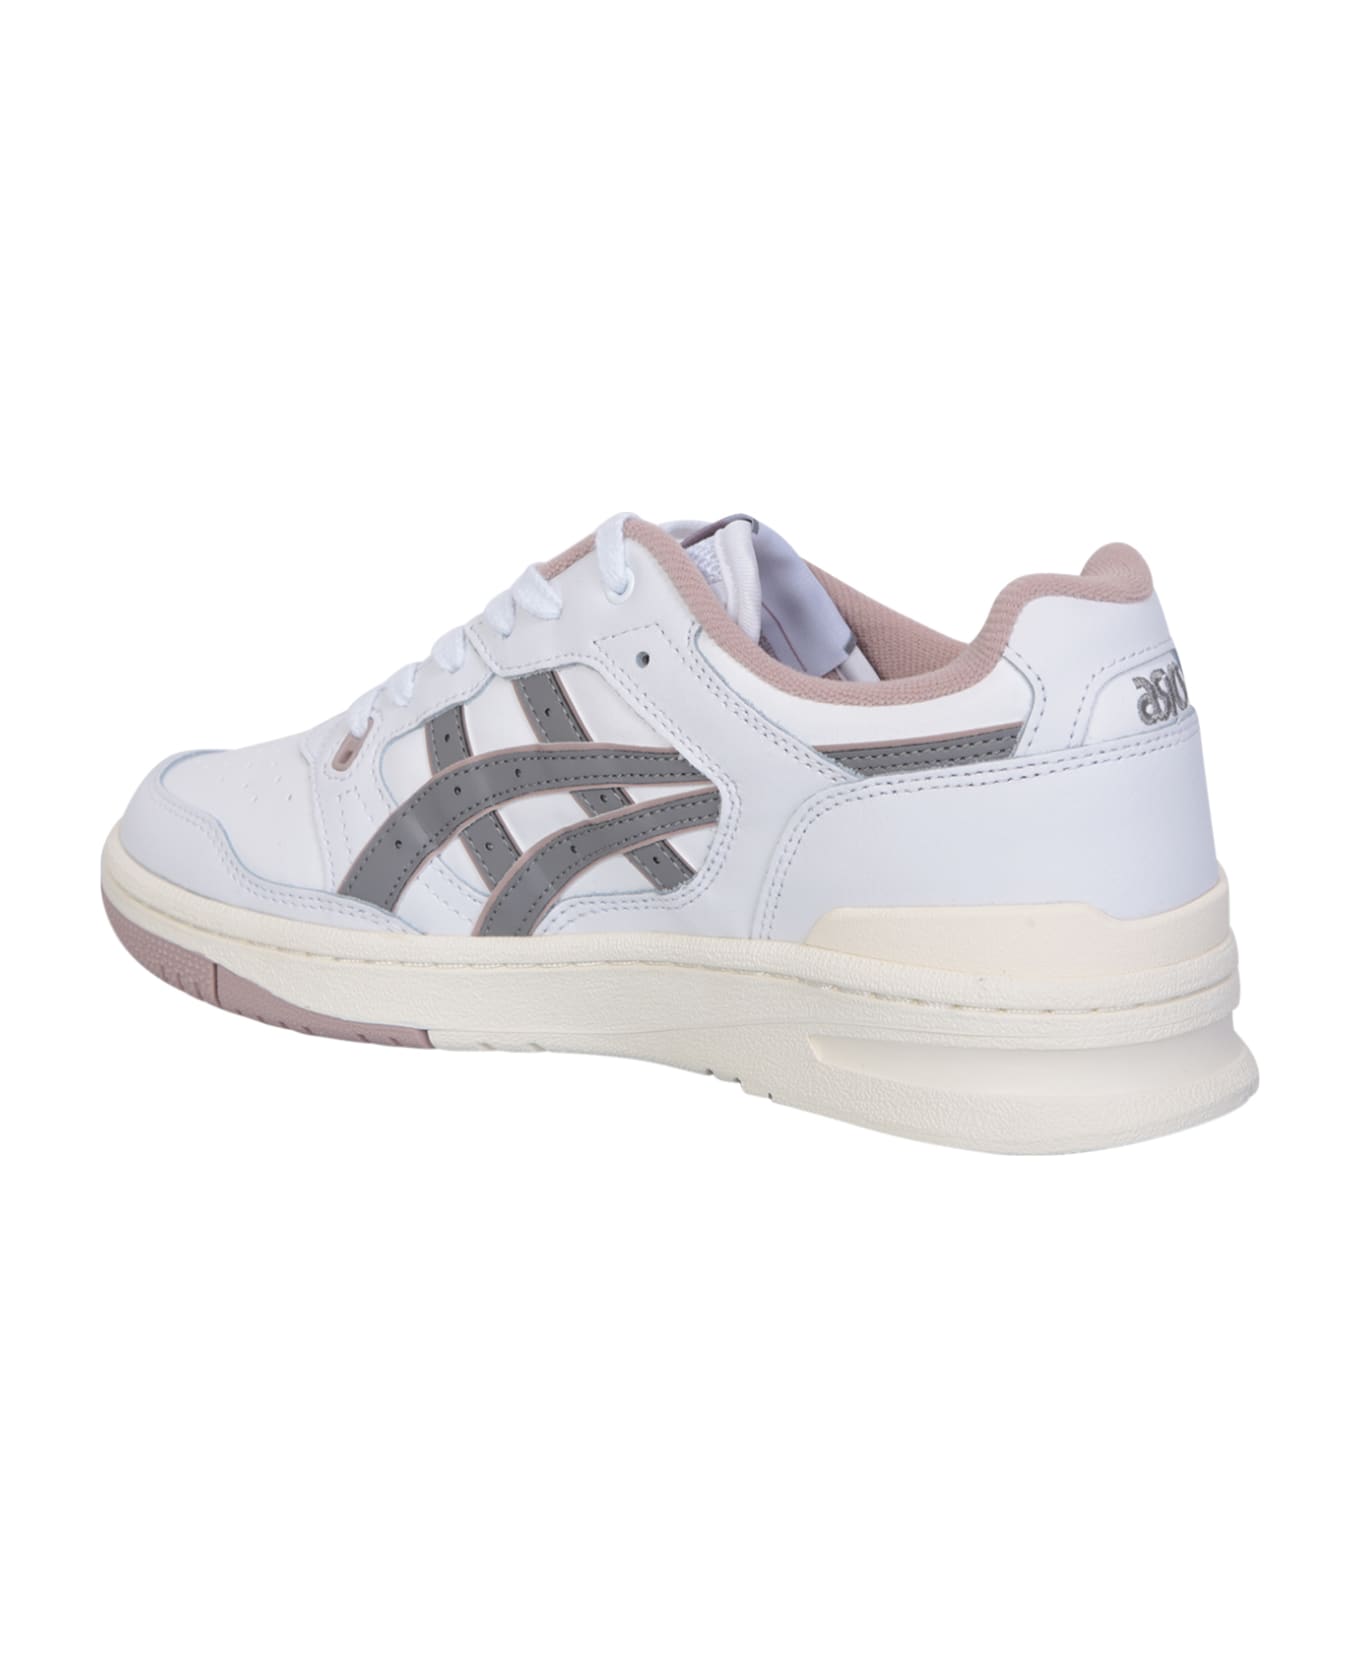 Asics White And Pink Ex89 Sneakers - White